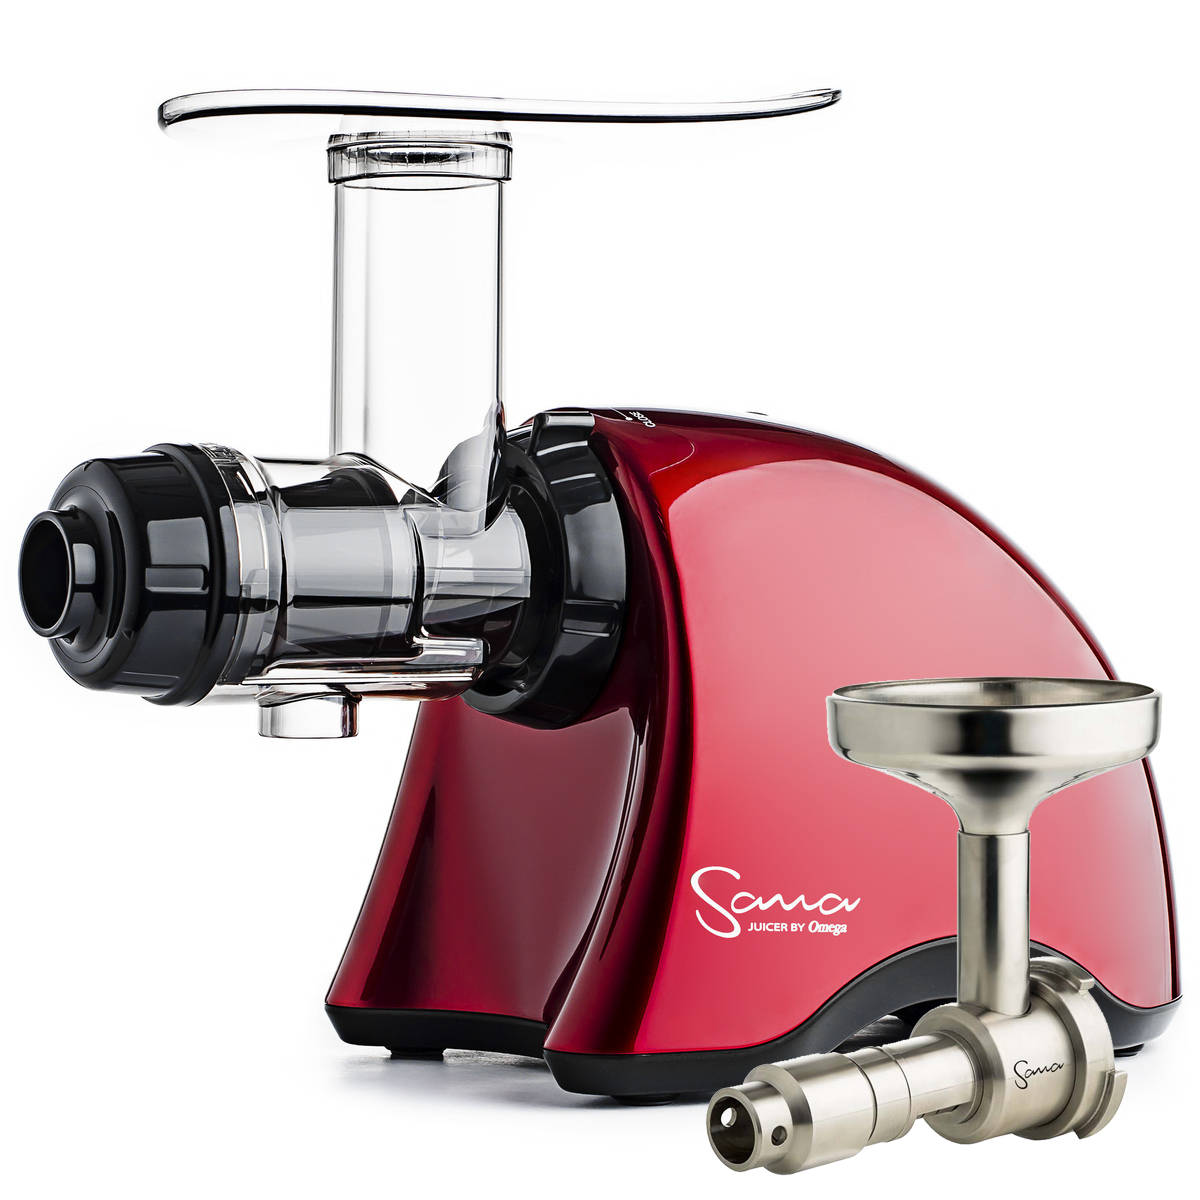 Omega Sana – EUJ-707 Slow Juicer with Oil Extractor